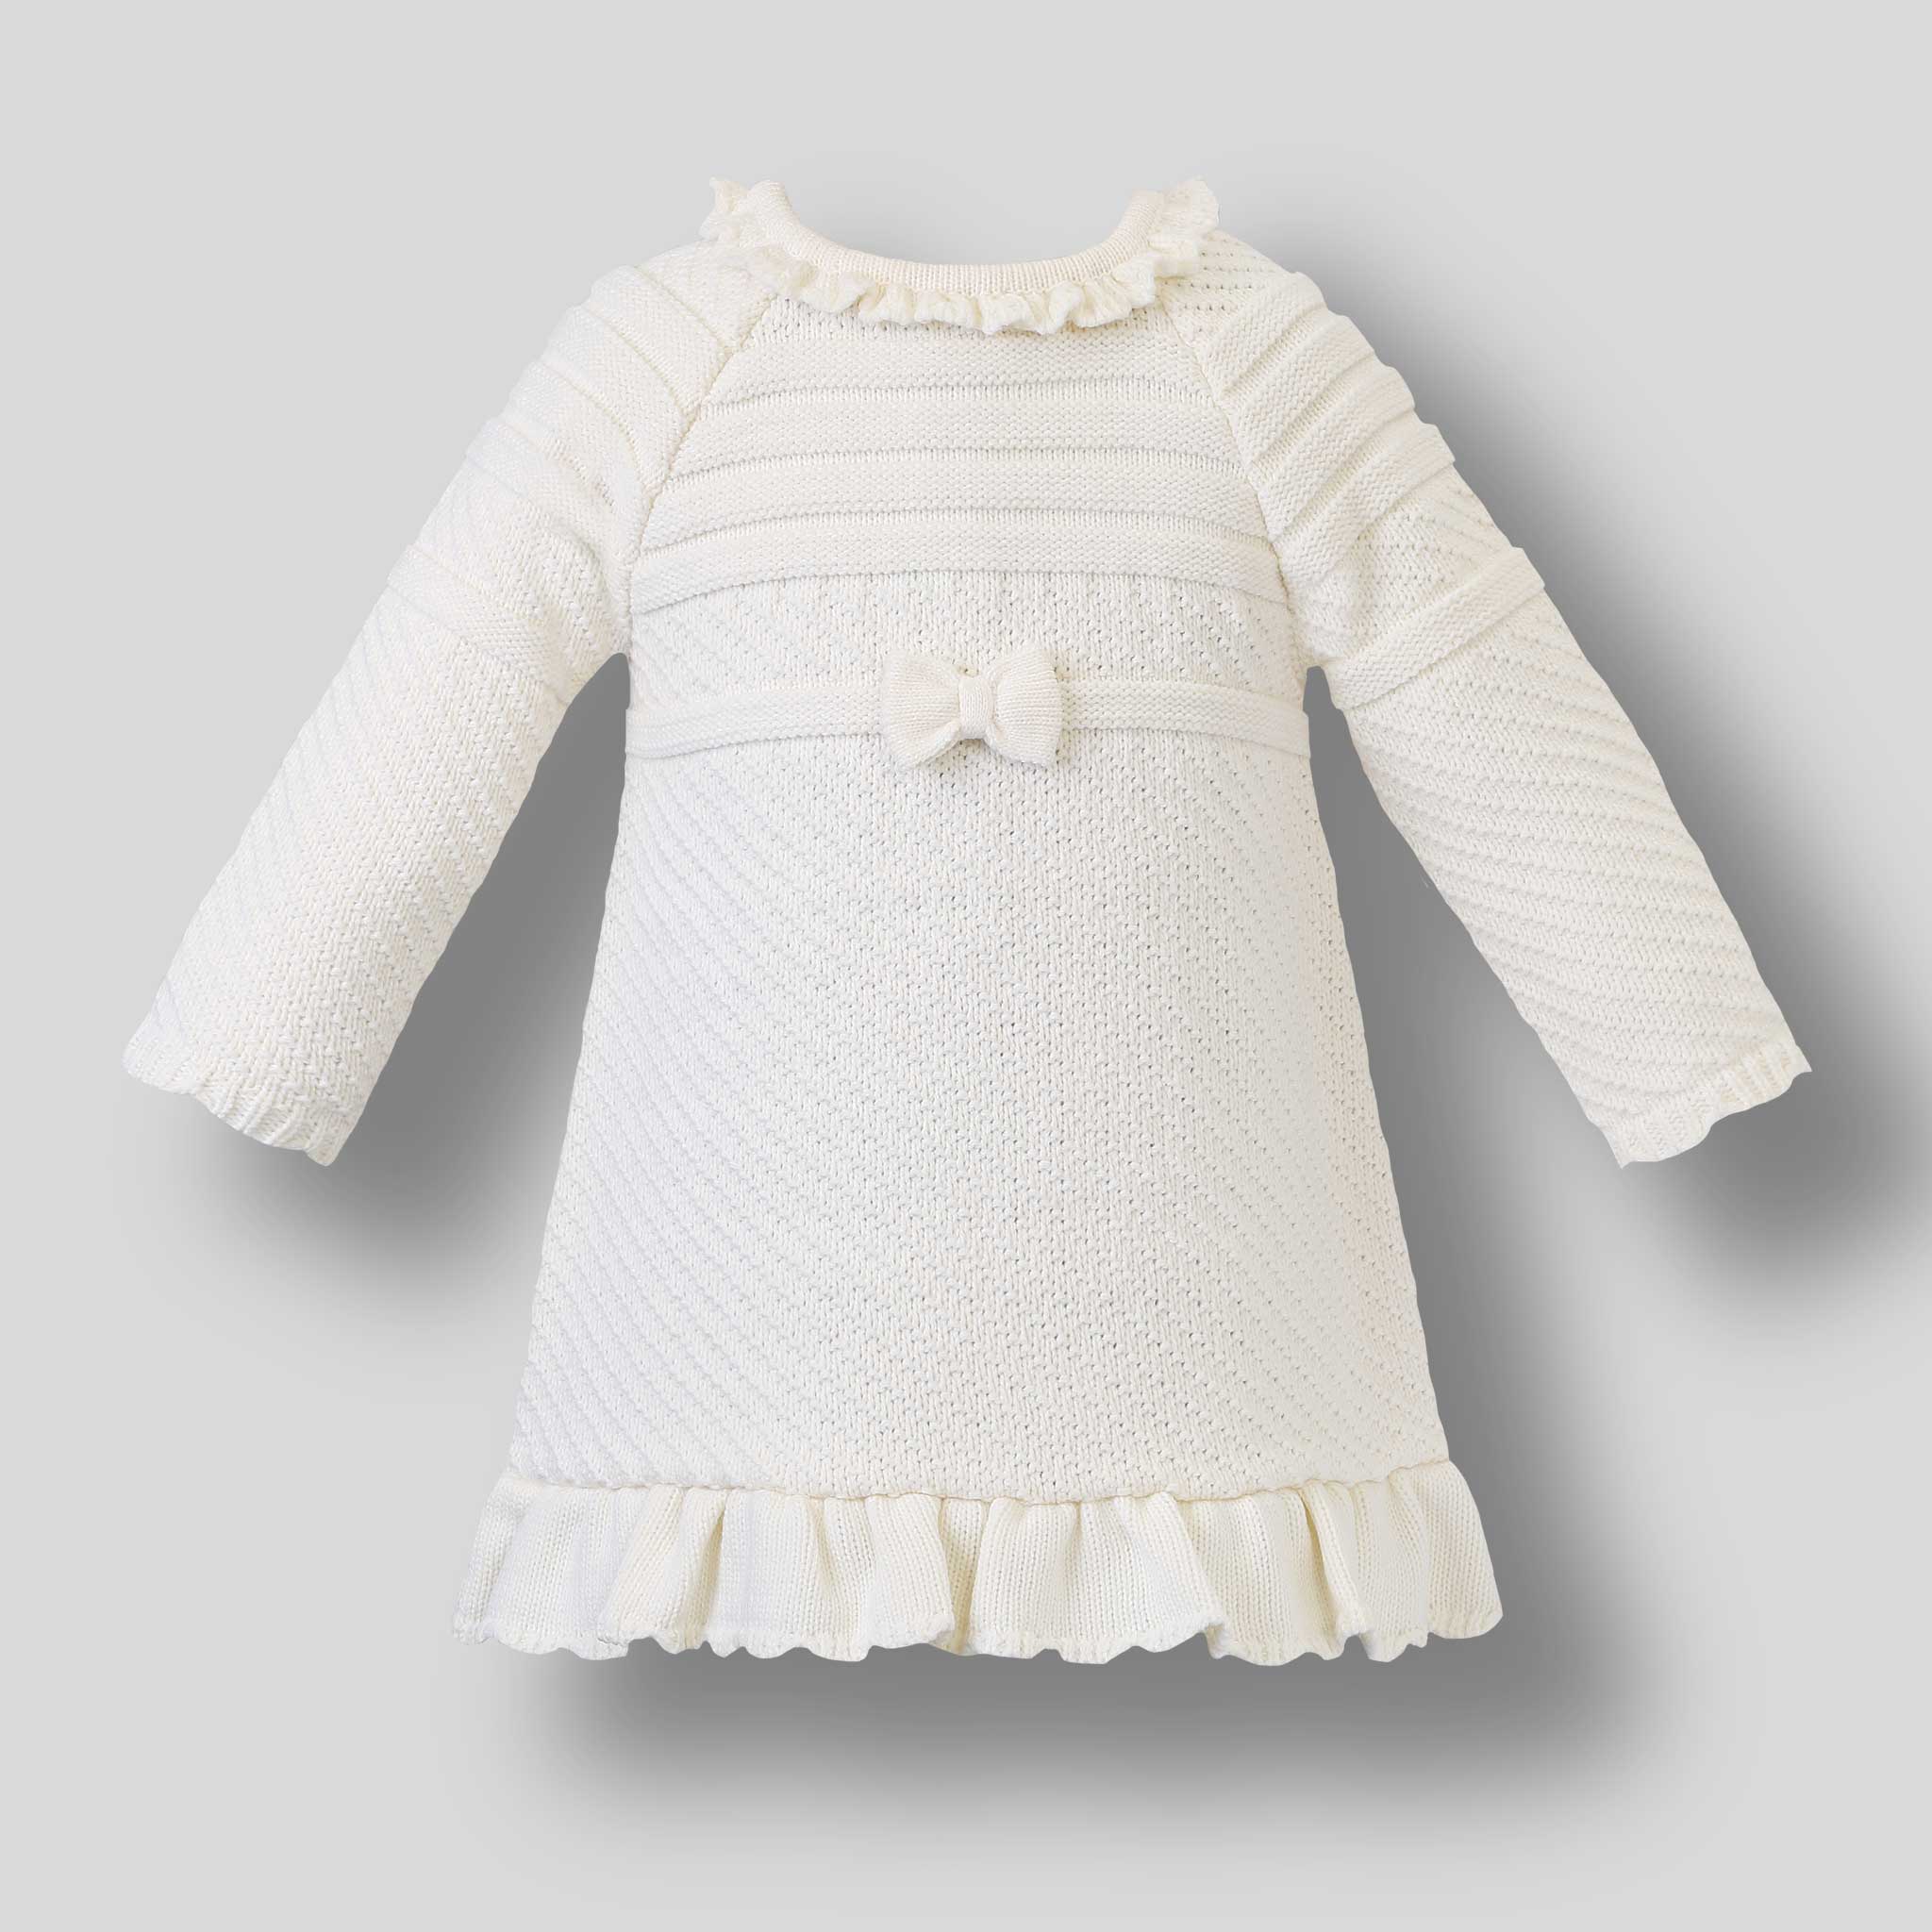 sarah louise ivory knitted dress